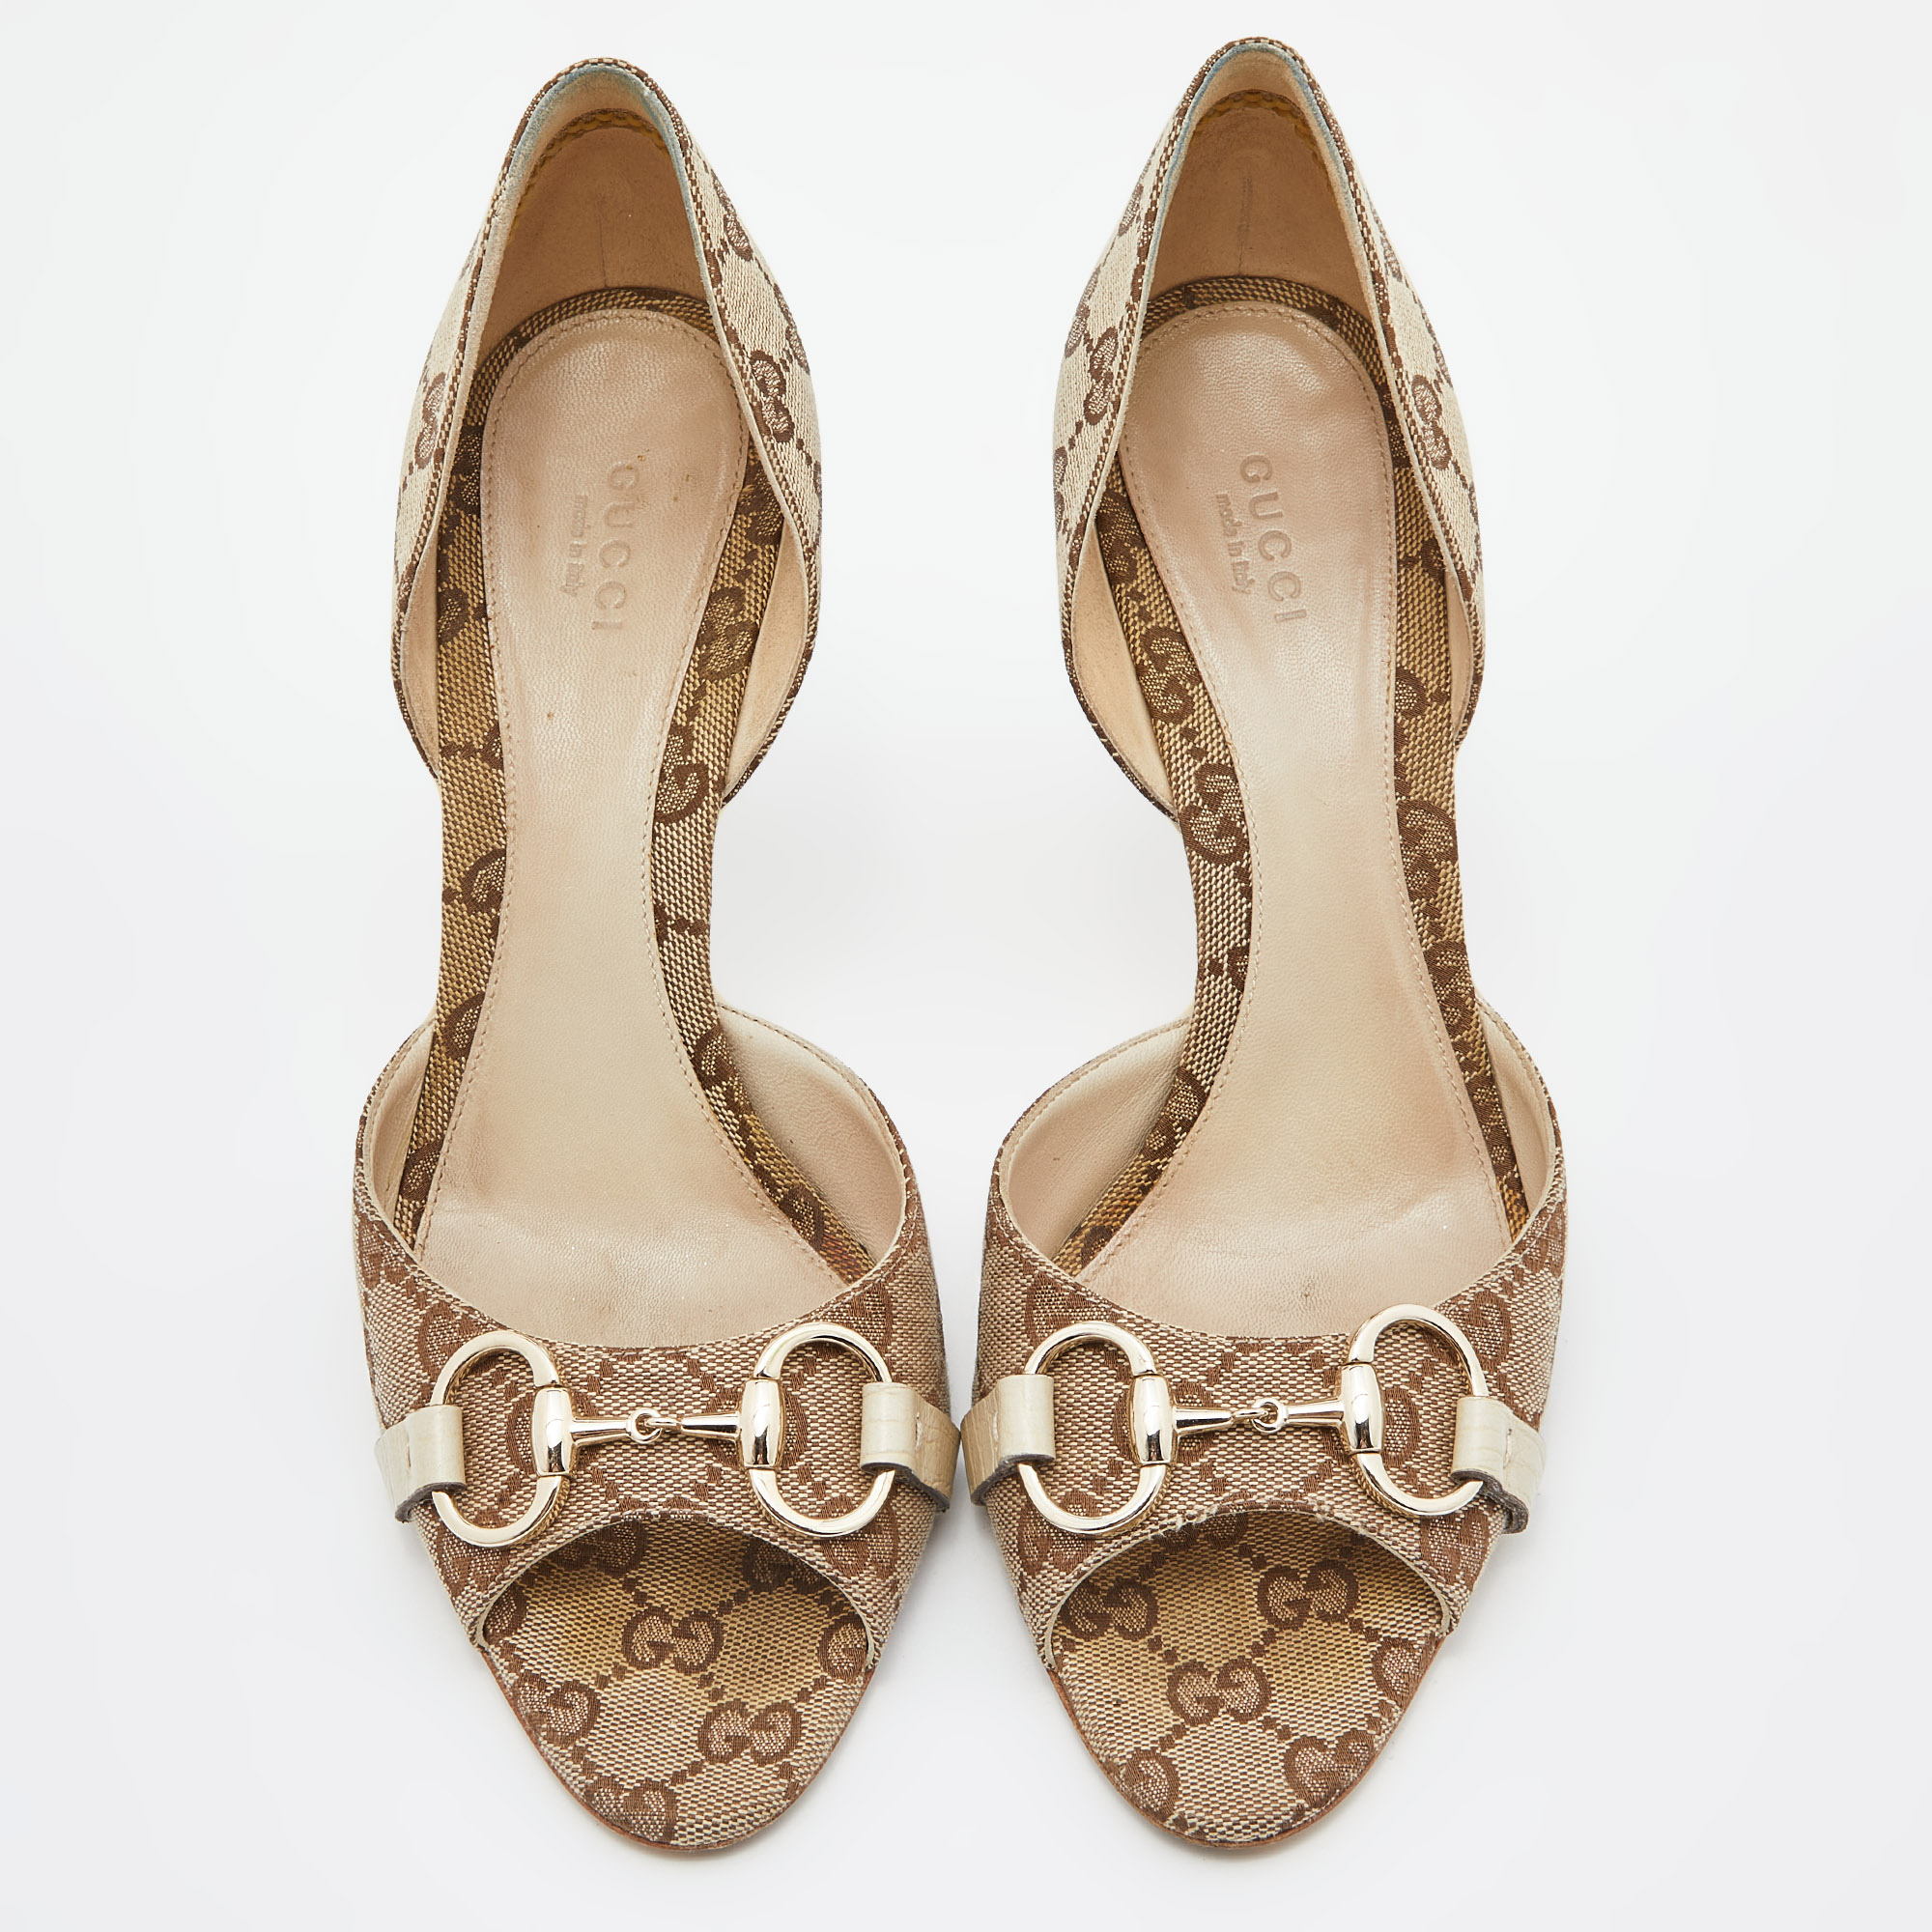 Gucci Beige/Cream GG Canvas And Leather Horsebit D'orsay Pumps Size 40